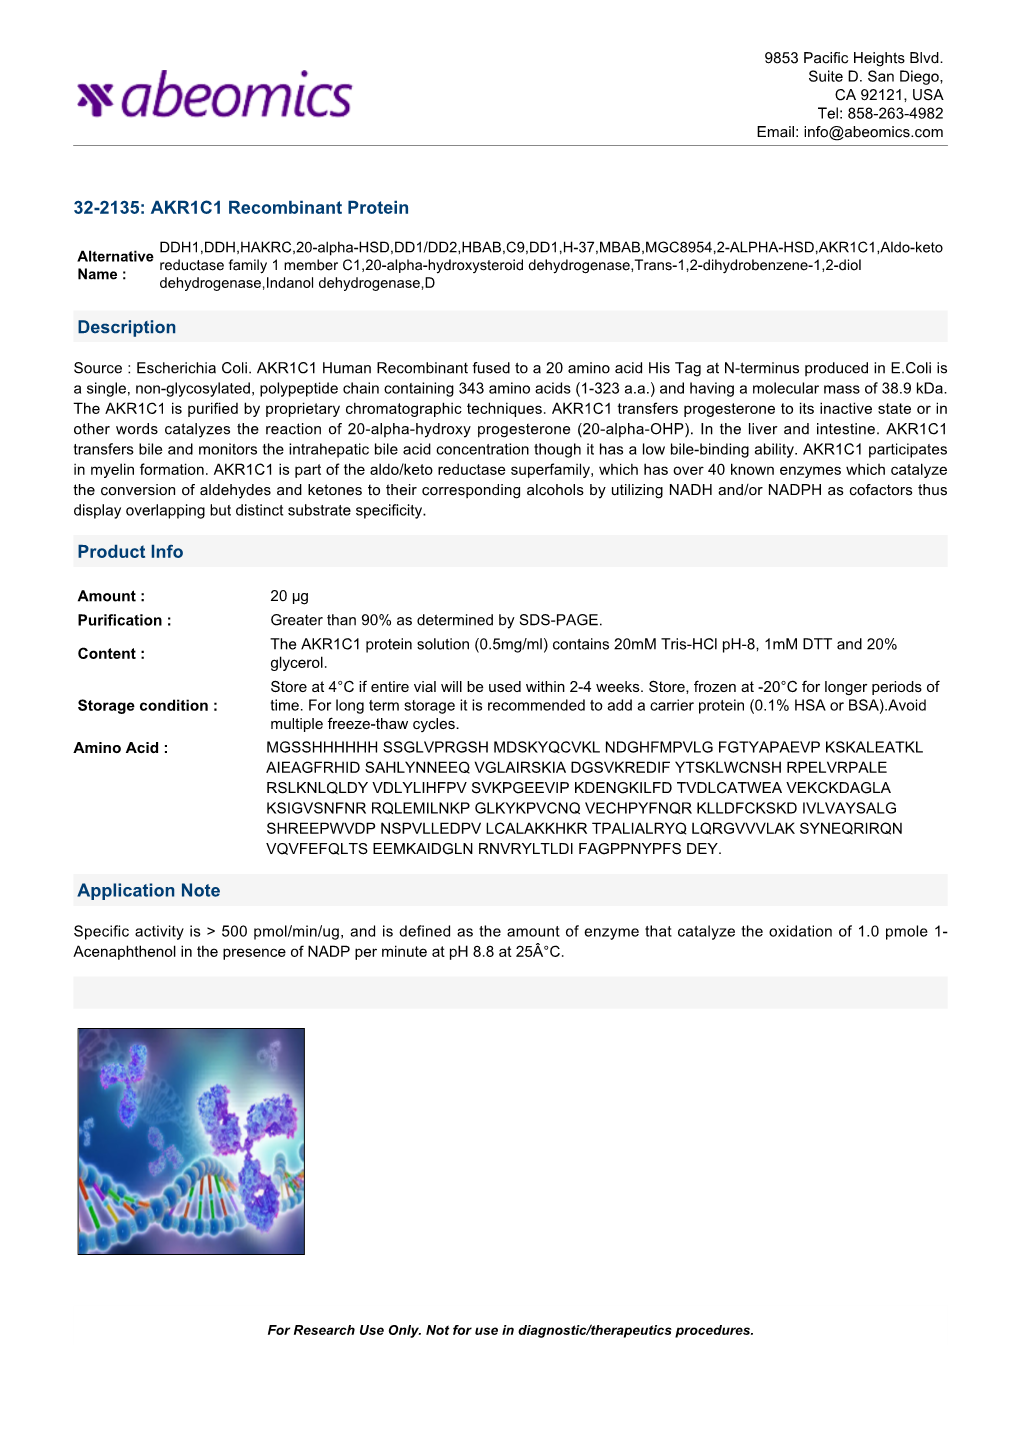 32-2135: AKR1C1 Recombinant Protein Description Product Info Application Note